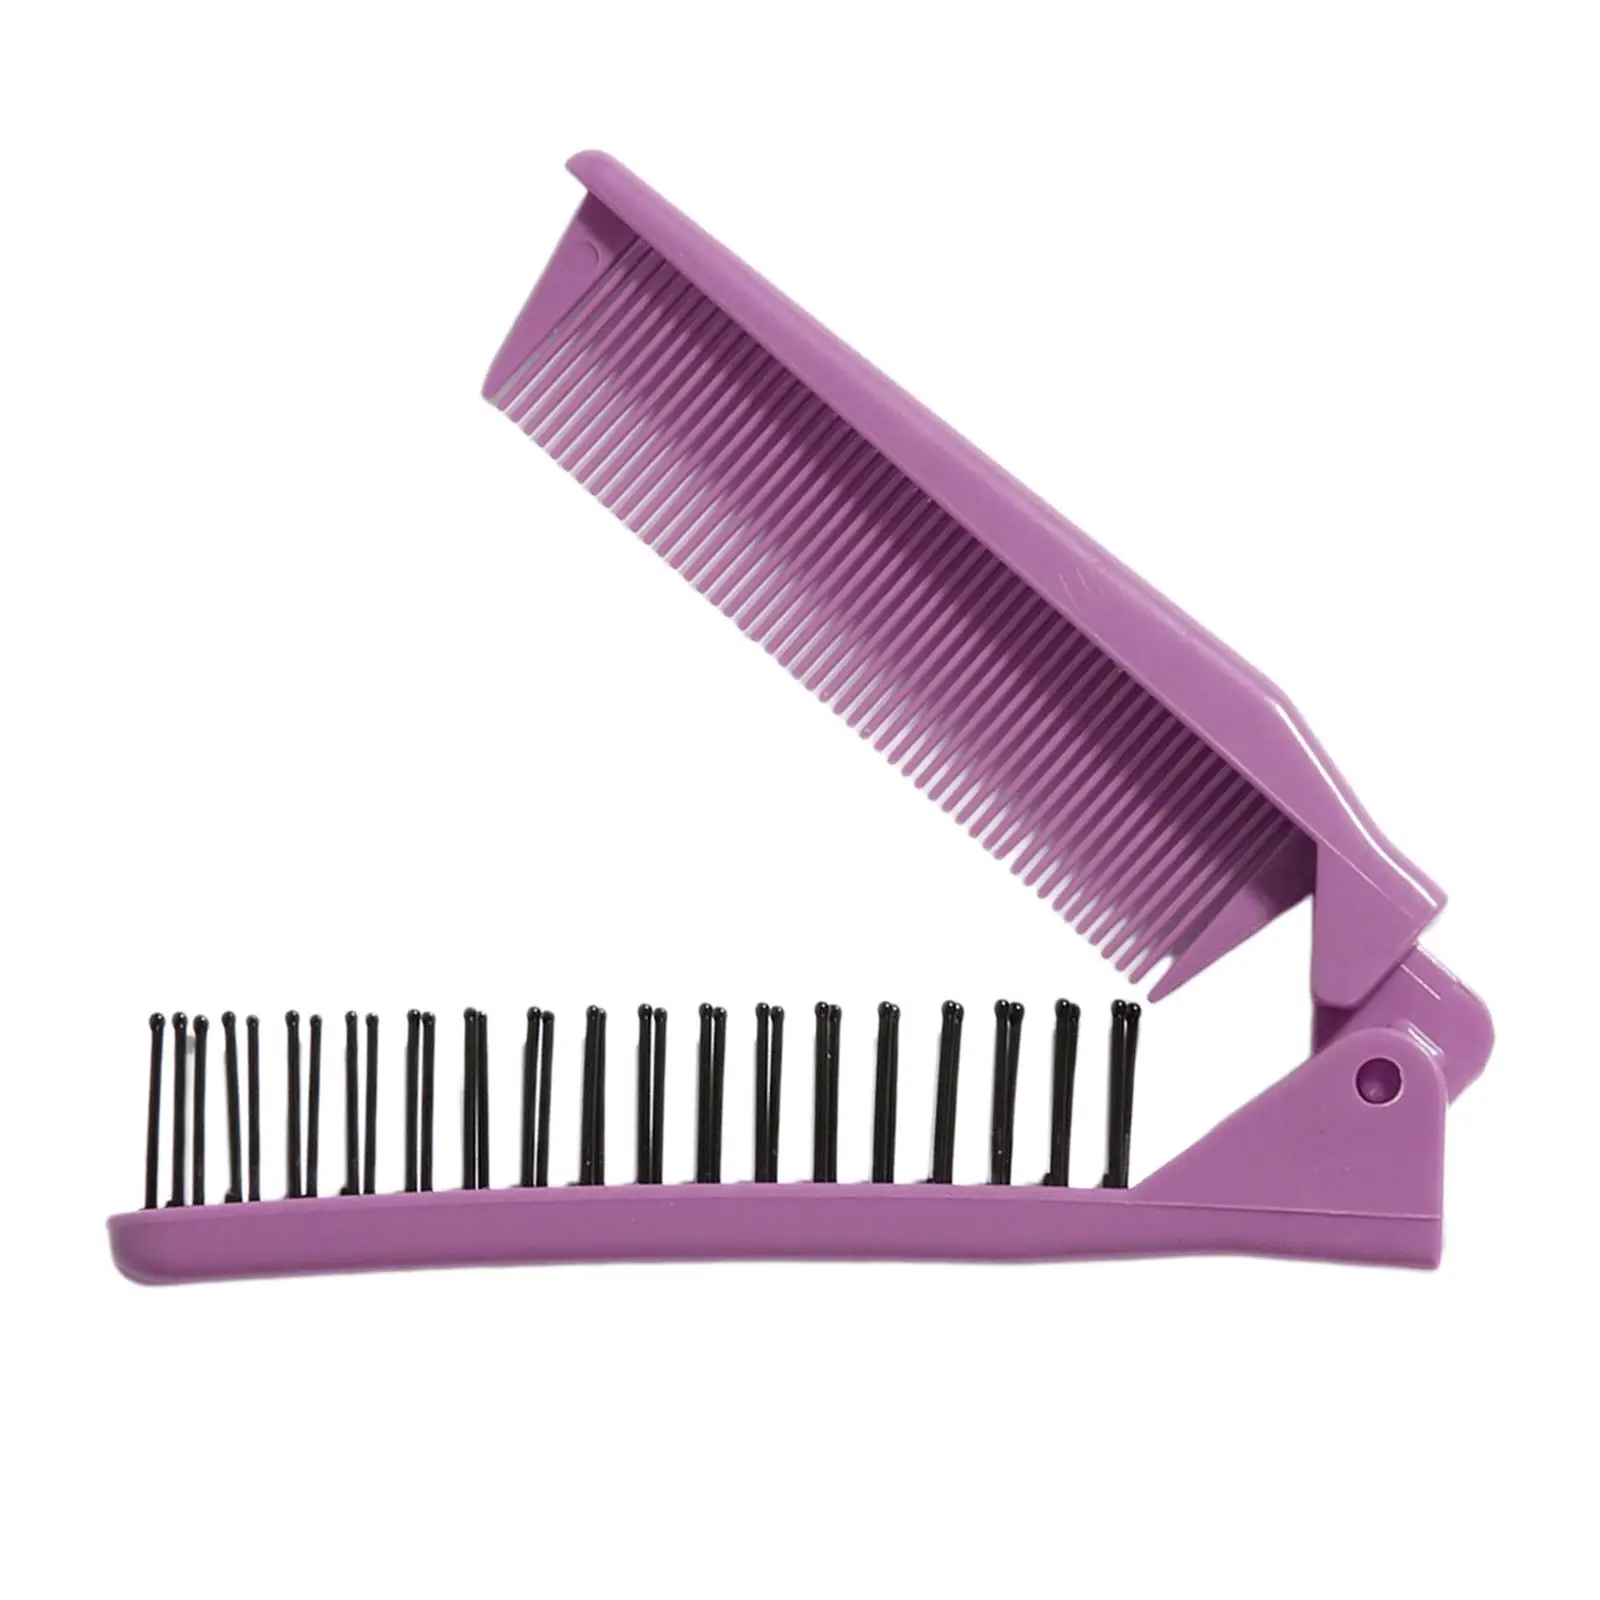 Foldable Hair Comb Brush Beautiful Practical Hairdressing Styling Tool Compact Hairbrush for travel Home Salon Men Women